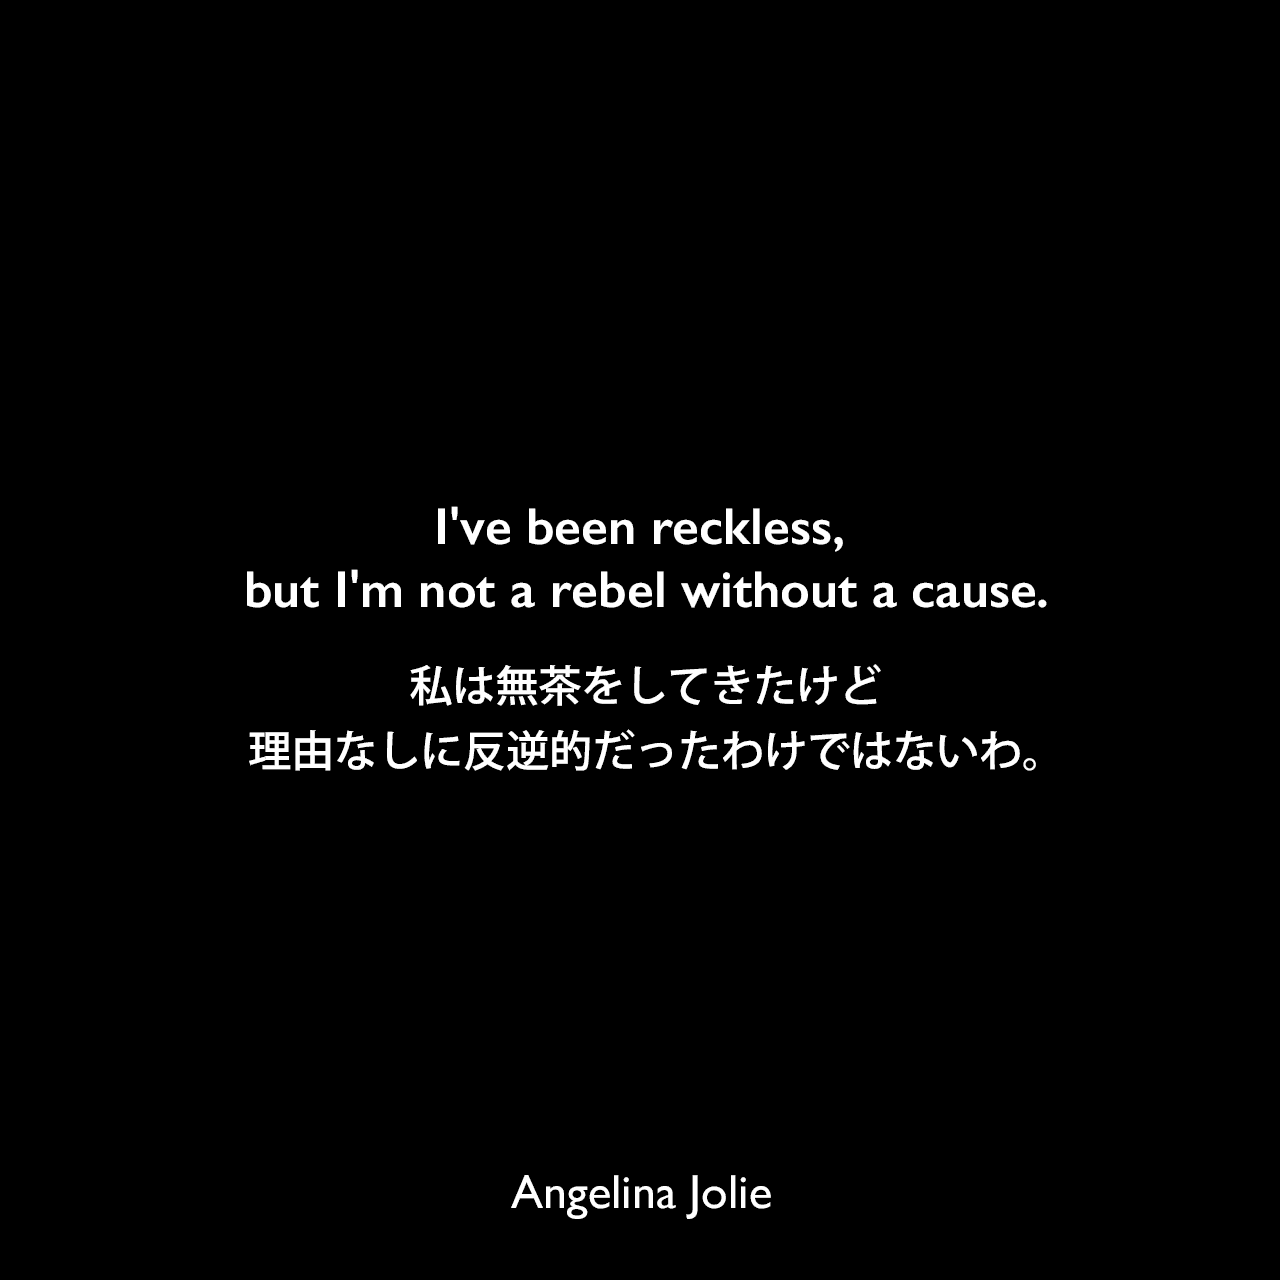 I've been reckless, but I'm not a rebel without a cause.私は無茶をしてきたけど、理由なしに反逆的だったわけではないわ。Angelina Jolie